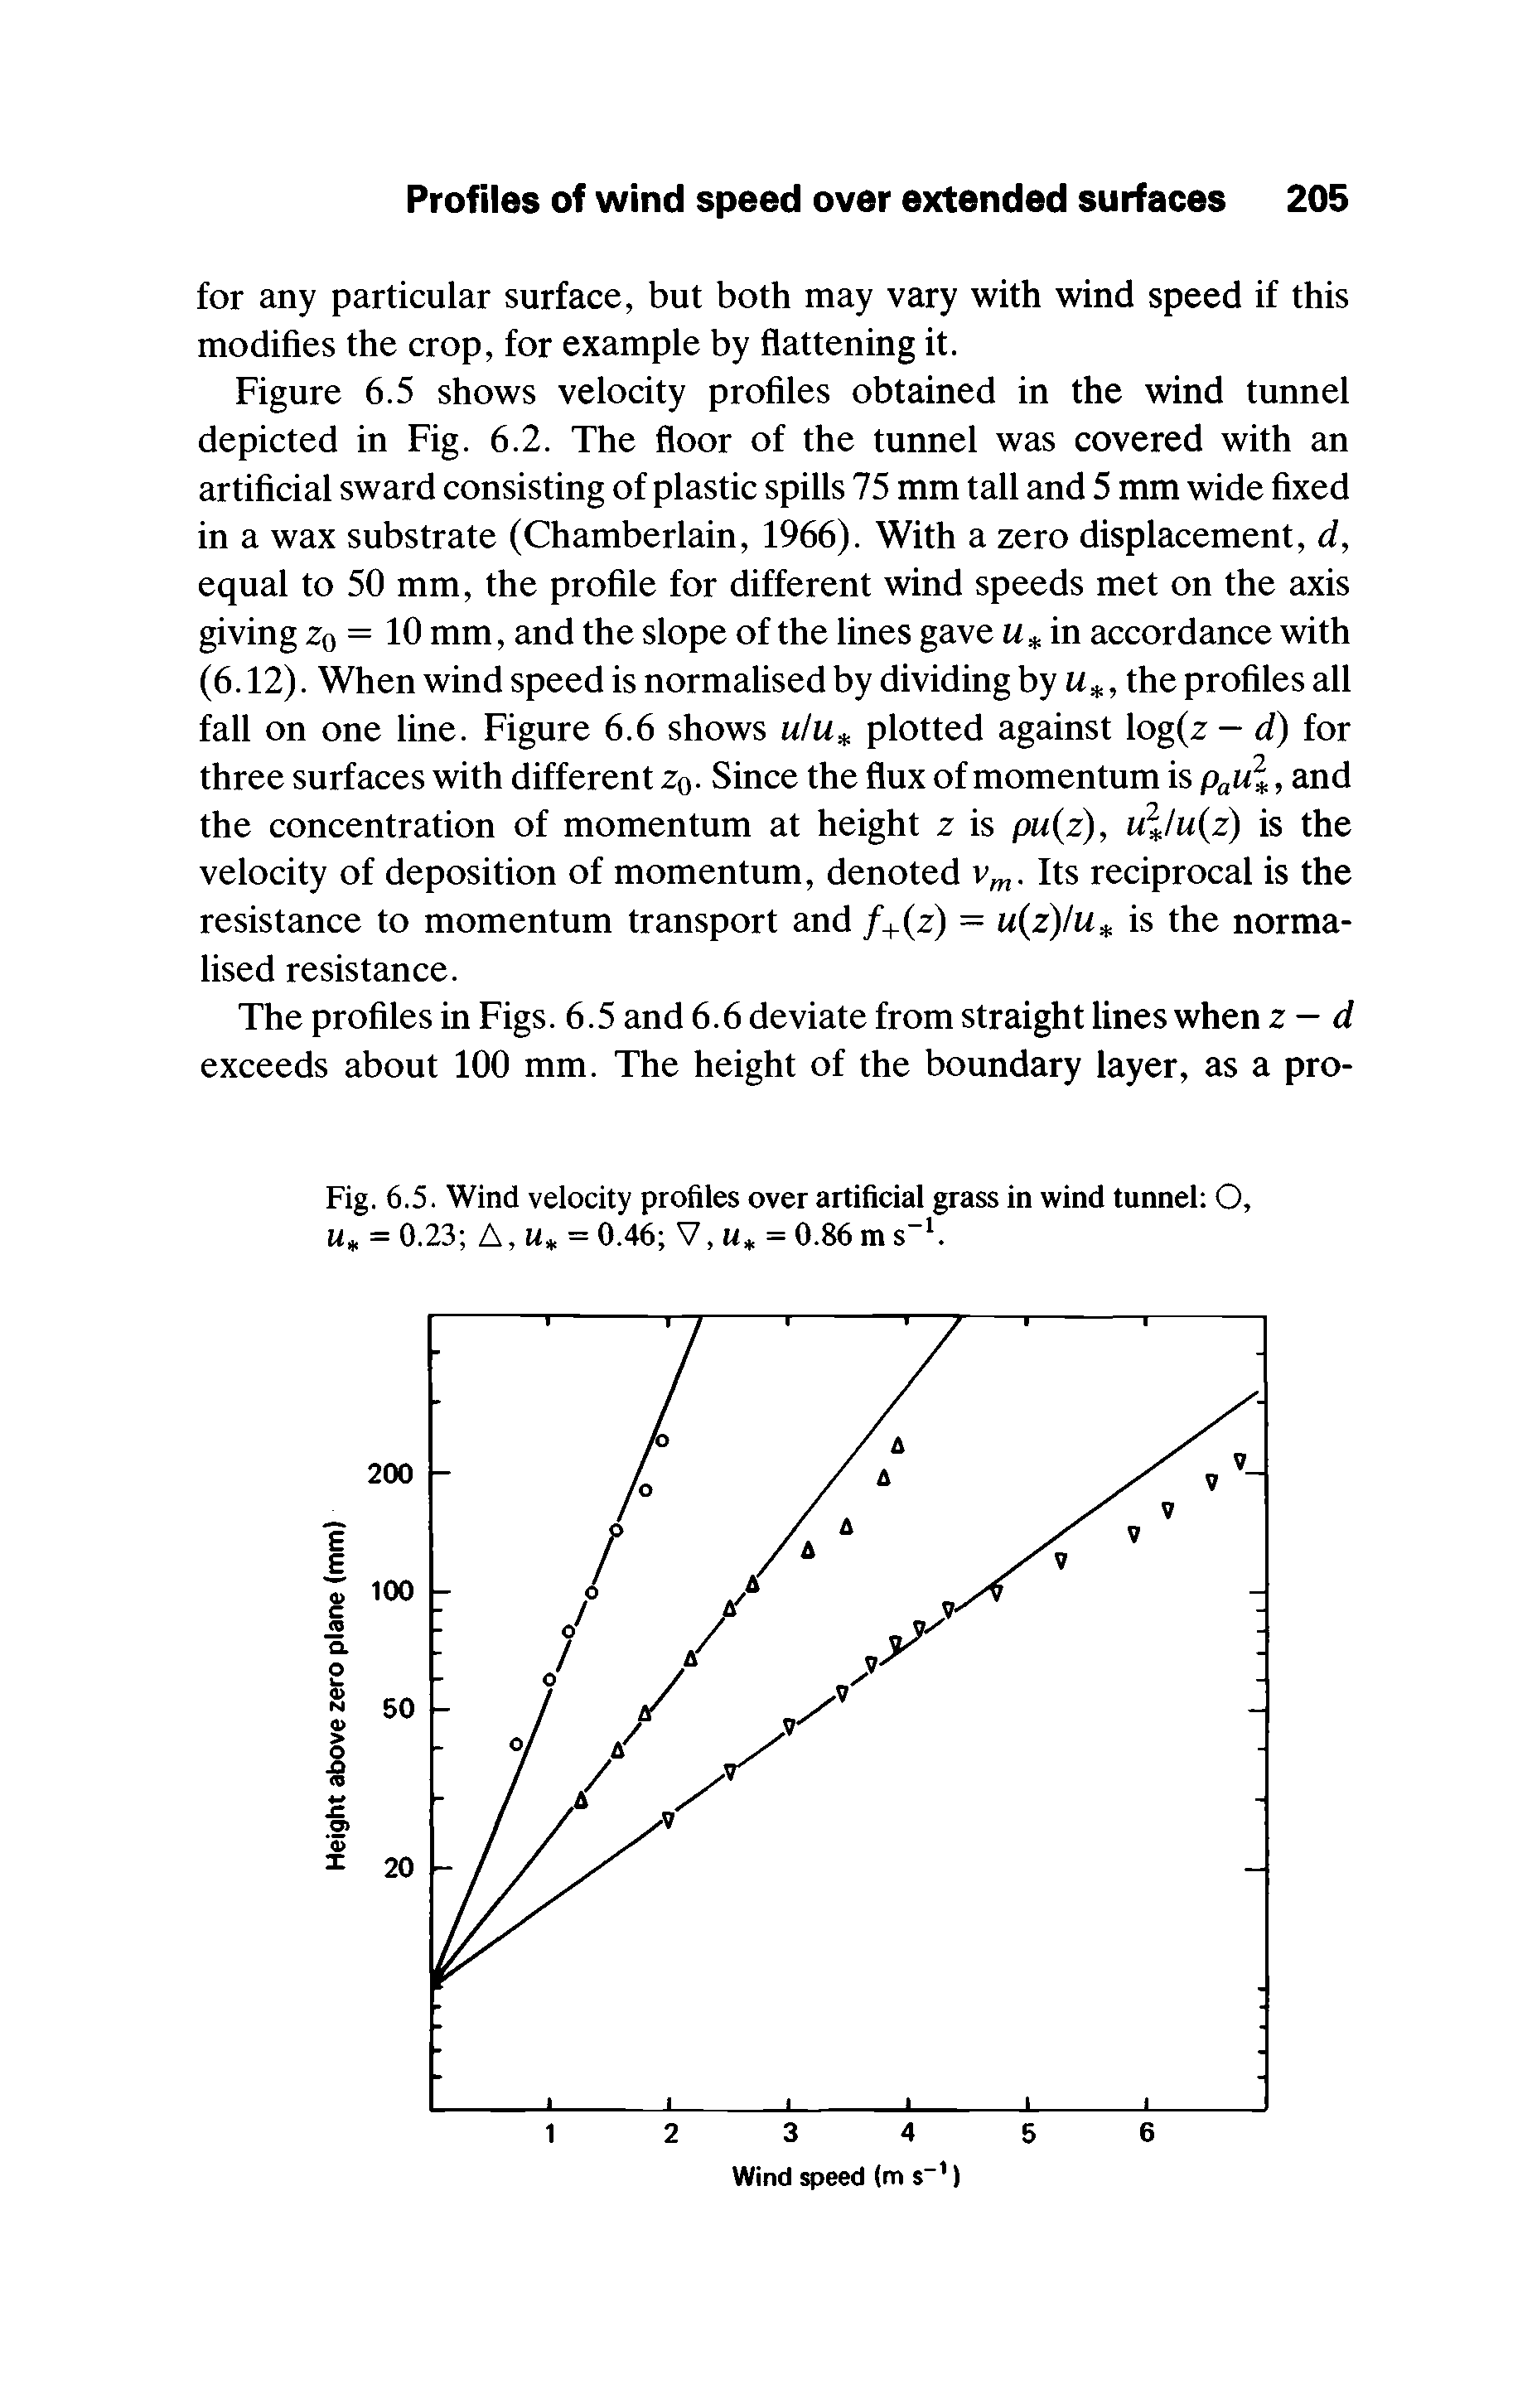 Figure 6.5 shows velocity profiles obtained in the wind tunnel depicted in Fig. 6.2. The floor of the tunnel was covered with an artificial sward consisting of plastic spills 75 mm tall and 5 mm wide fixed in a wax substrate (Chamberlain, 1966). With a zero displacement, d, equal to 50 mm, the profile for different wind speeds met on the axis giving z0 = 10 mm, and the slope of the lines gave a in accordance with (6.12). When wind speed is normalised by dividing by a, the profiles all fall on one line. Figure 6.6 shows u/a plotted against log(z — d) for three surfaces with different z0. Since the flux of momentum is pau, and the concentration of momentum at height z is pu(z), u2Ju z) is the velocity of deposition of momentum, denoted vm. Its reciprocal is the resistance to momentum transport and /+(z) = u(z)lu t is the normalised resistance.